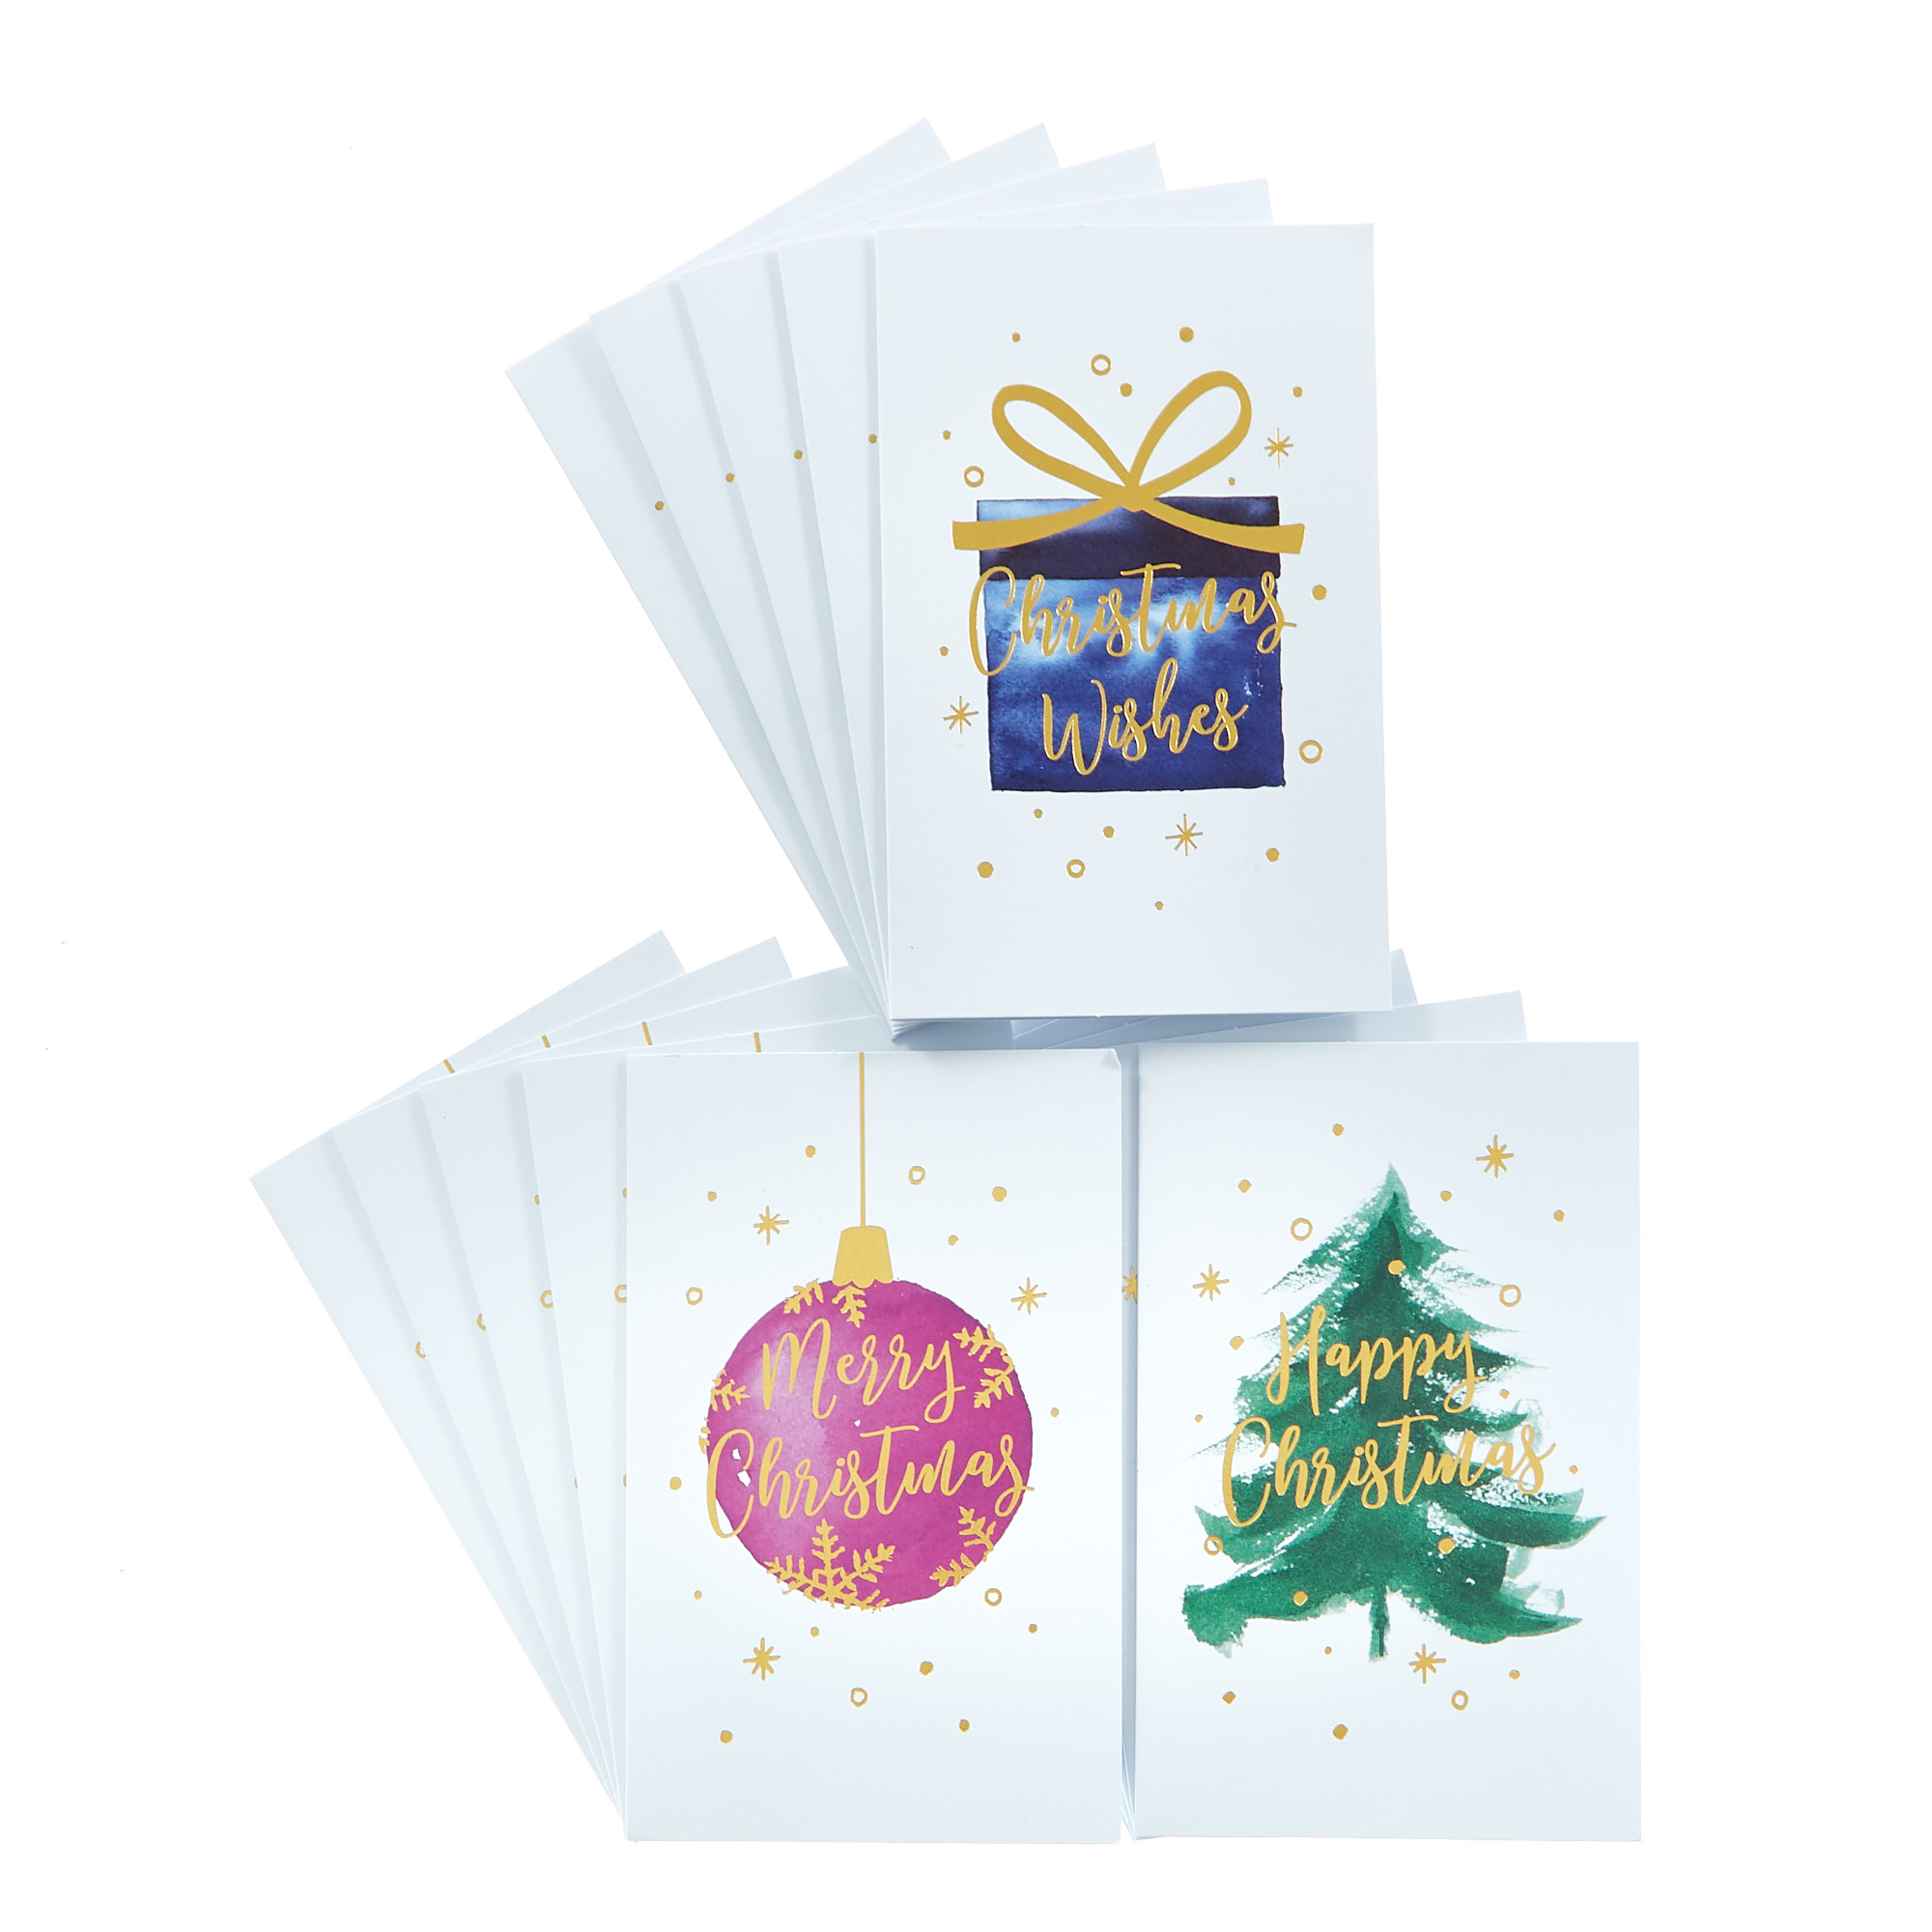 18 Watercolour Charity Christmas Cards - 3 Designs 